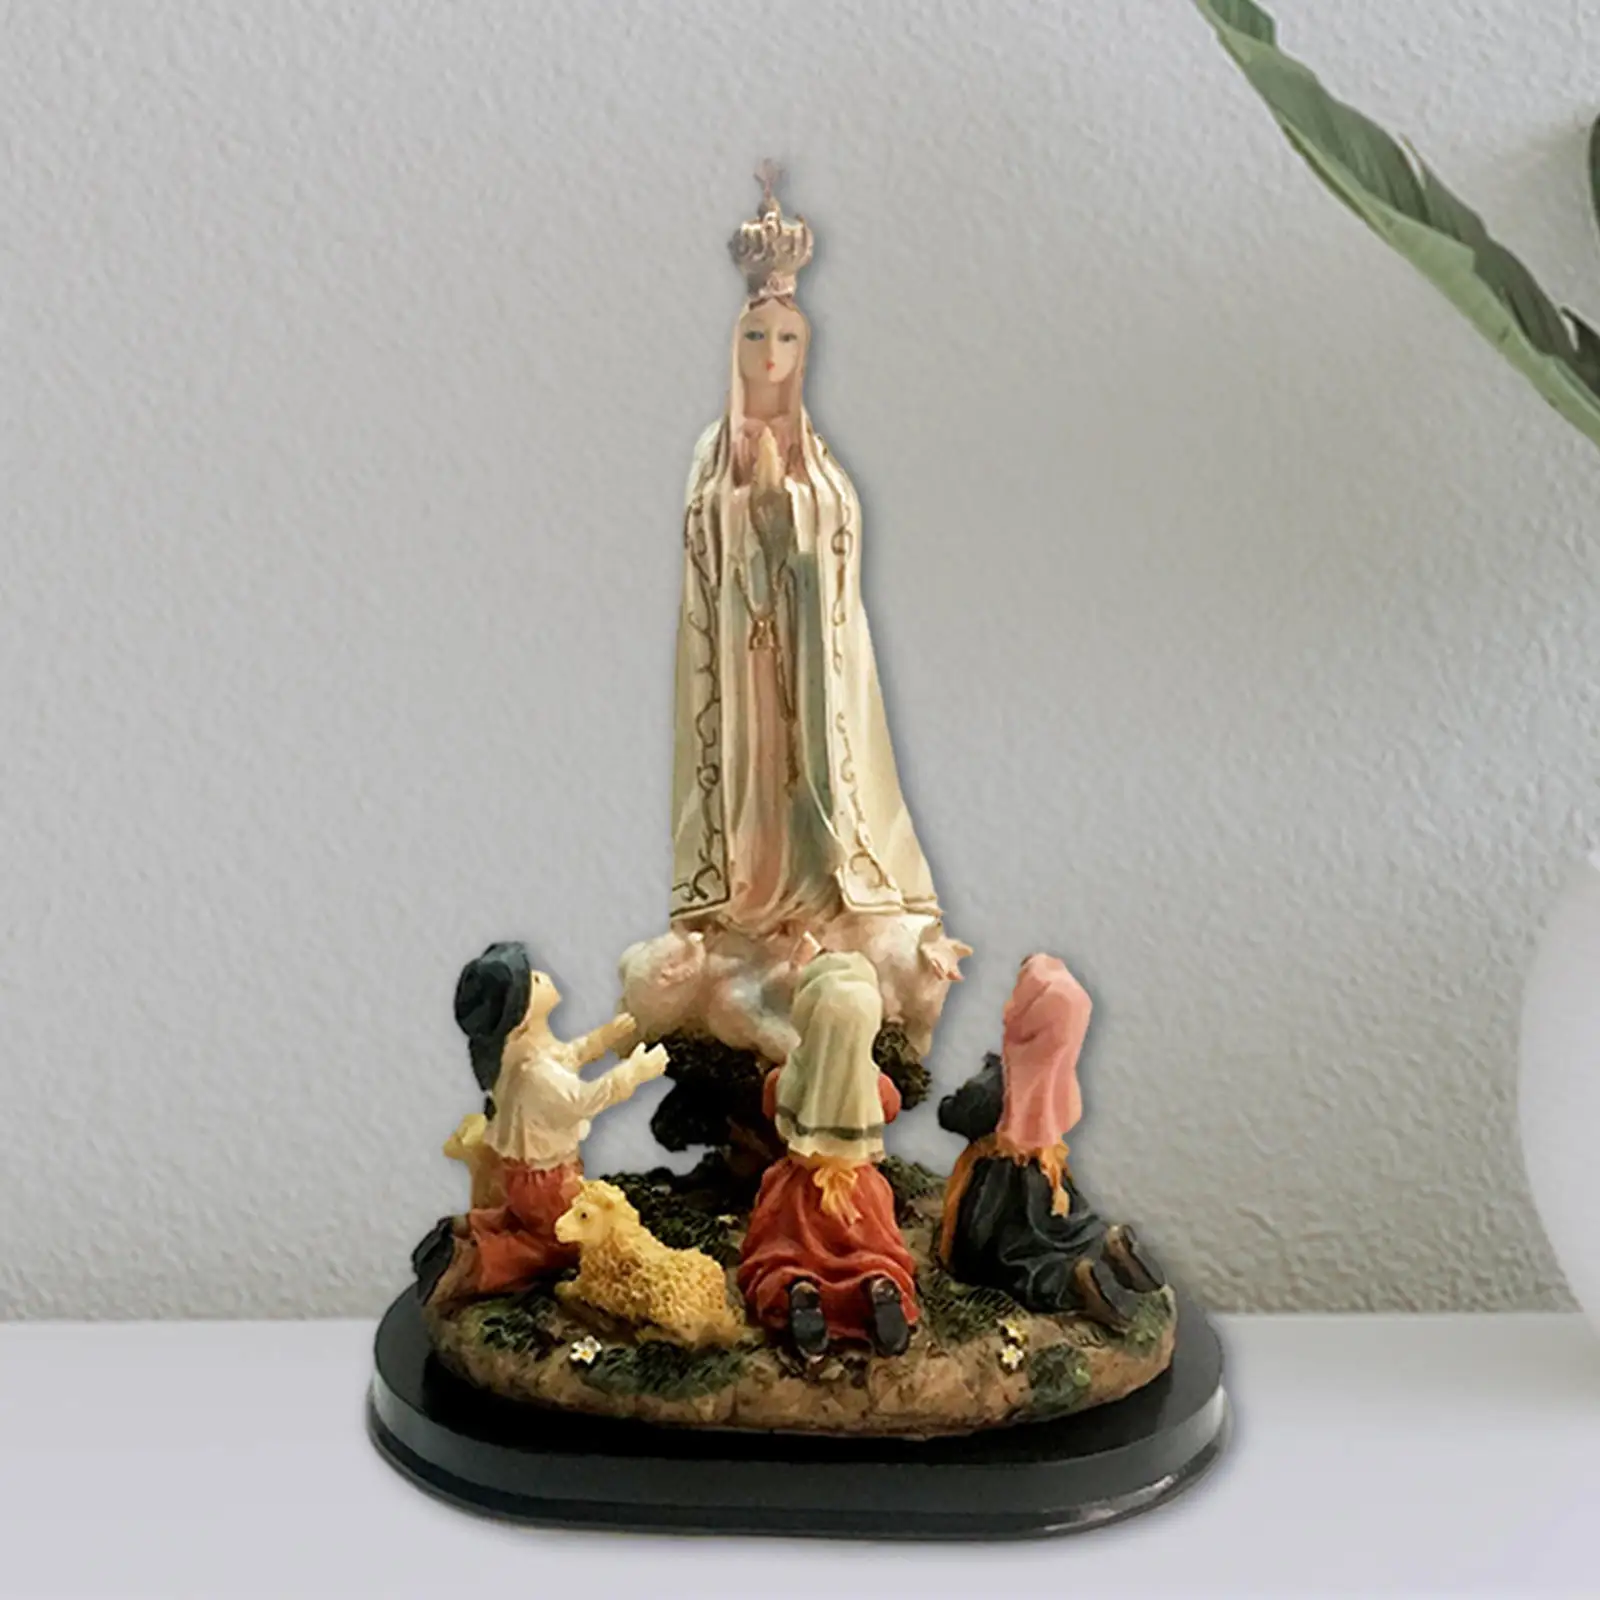 Christ Virgin Mary Holy Religious Glorious Grace Saint Cultural Collectibles Sculpture for Home Church Follower Believer Mother